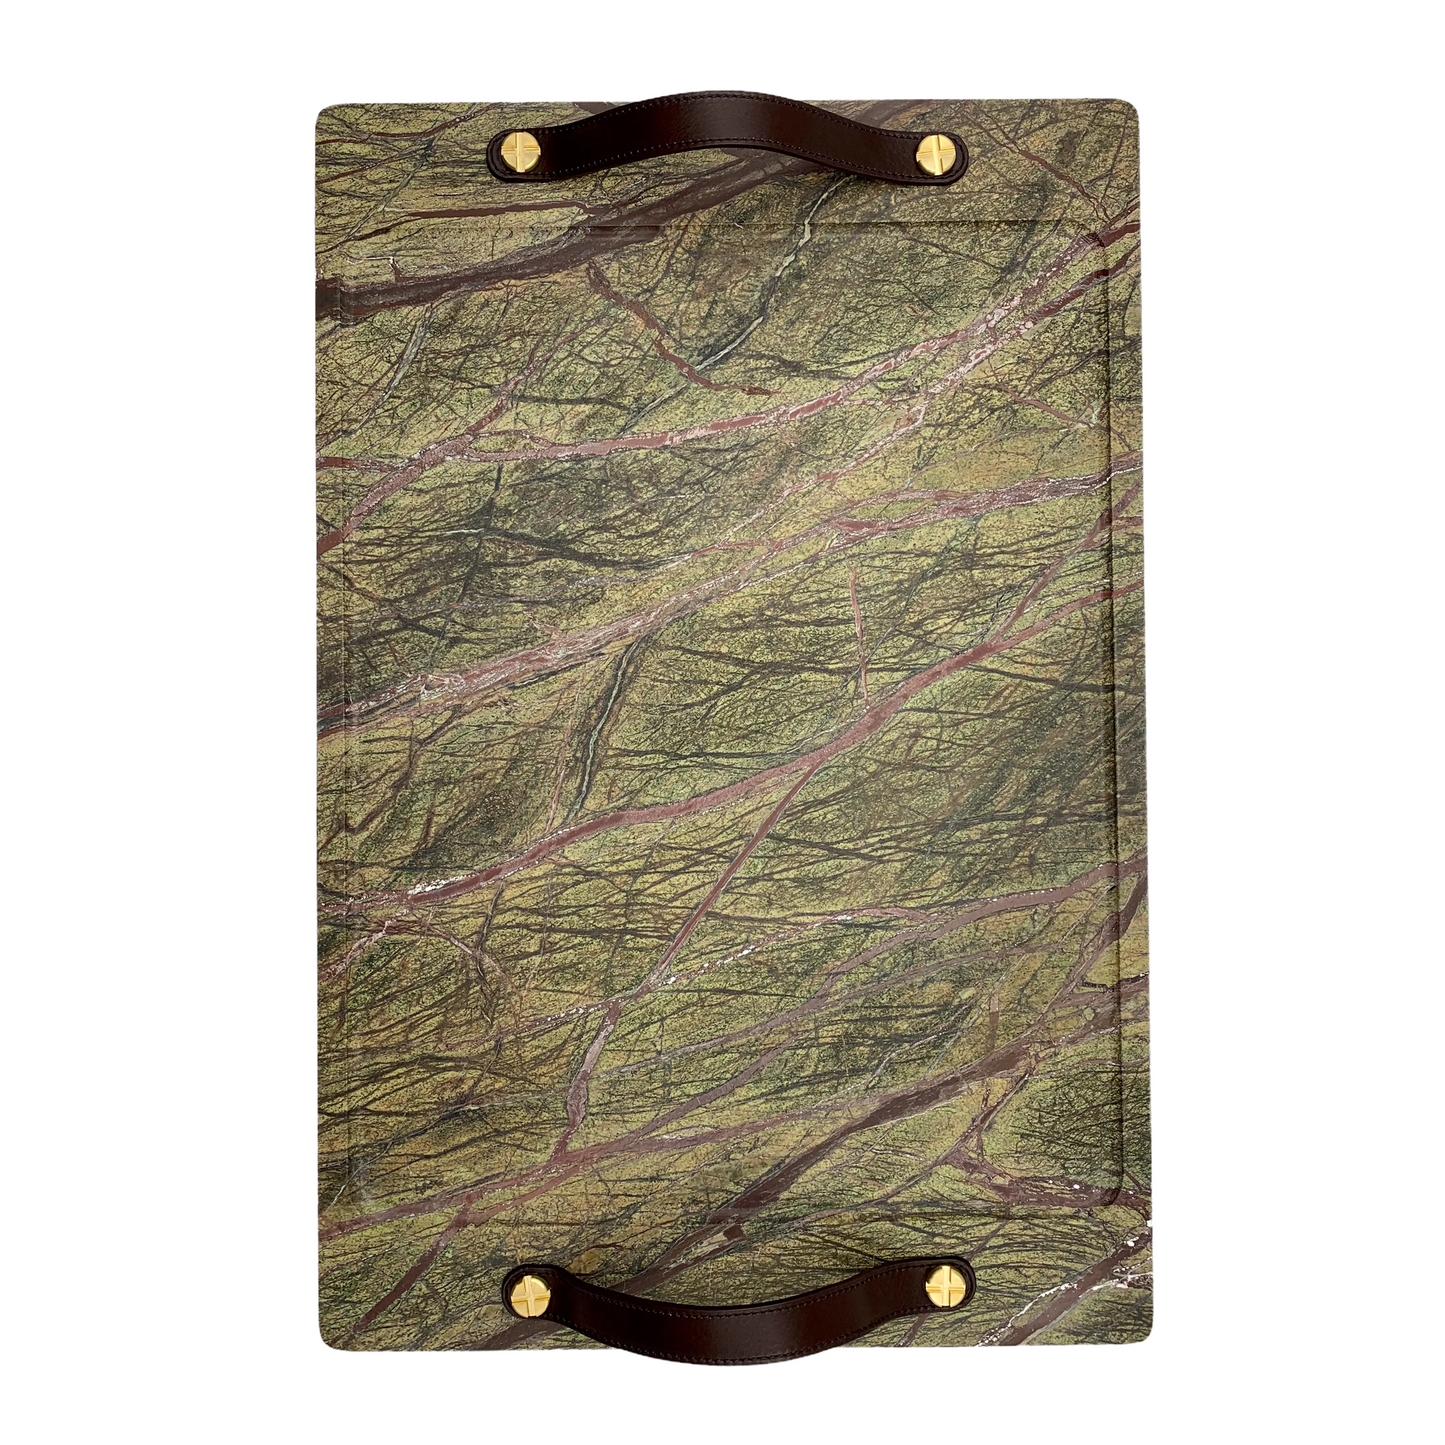 Bidasar Marble Barneys Tray with Leather and Brass Accents